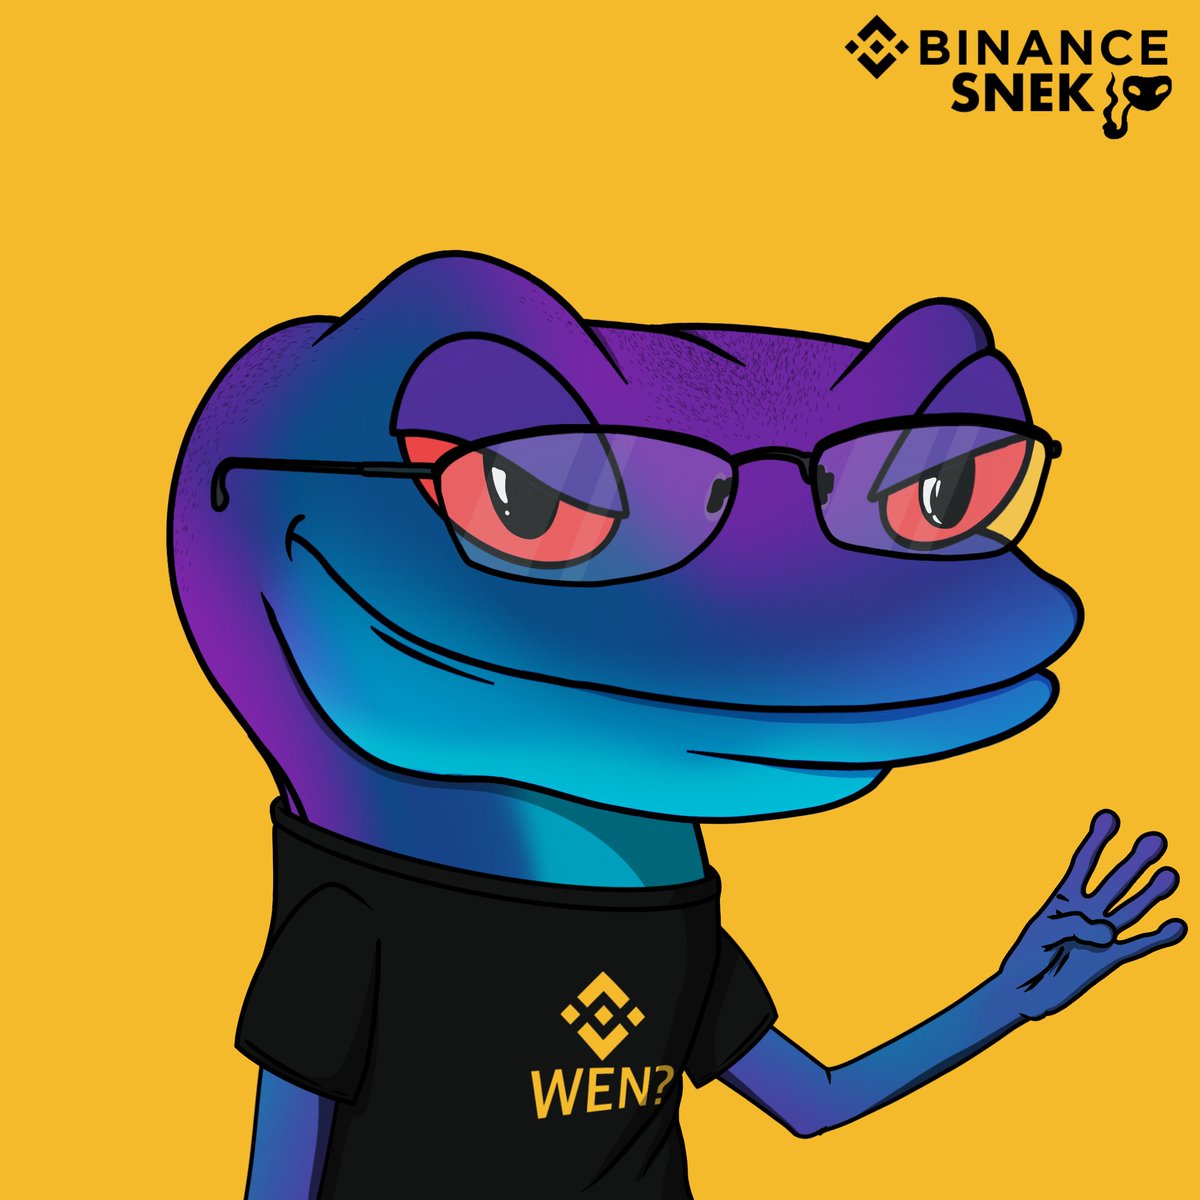 Hey @binance, sssomeone told me you want to lissst new asssets? 😎